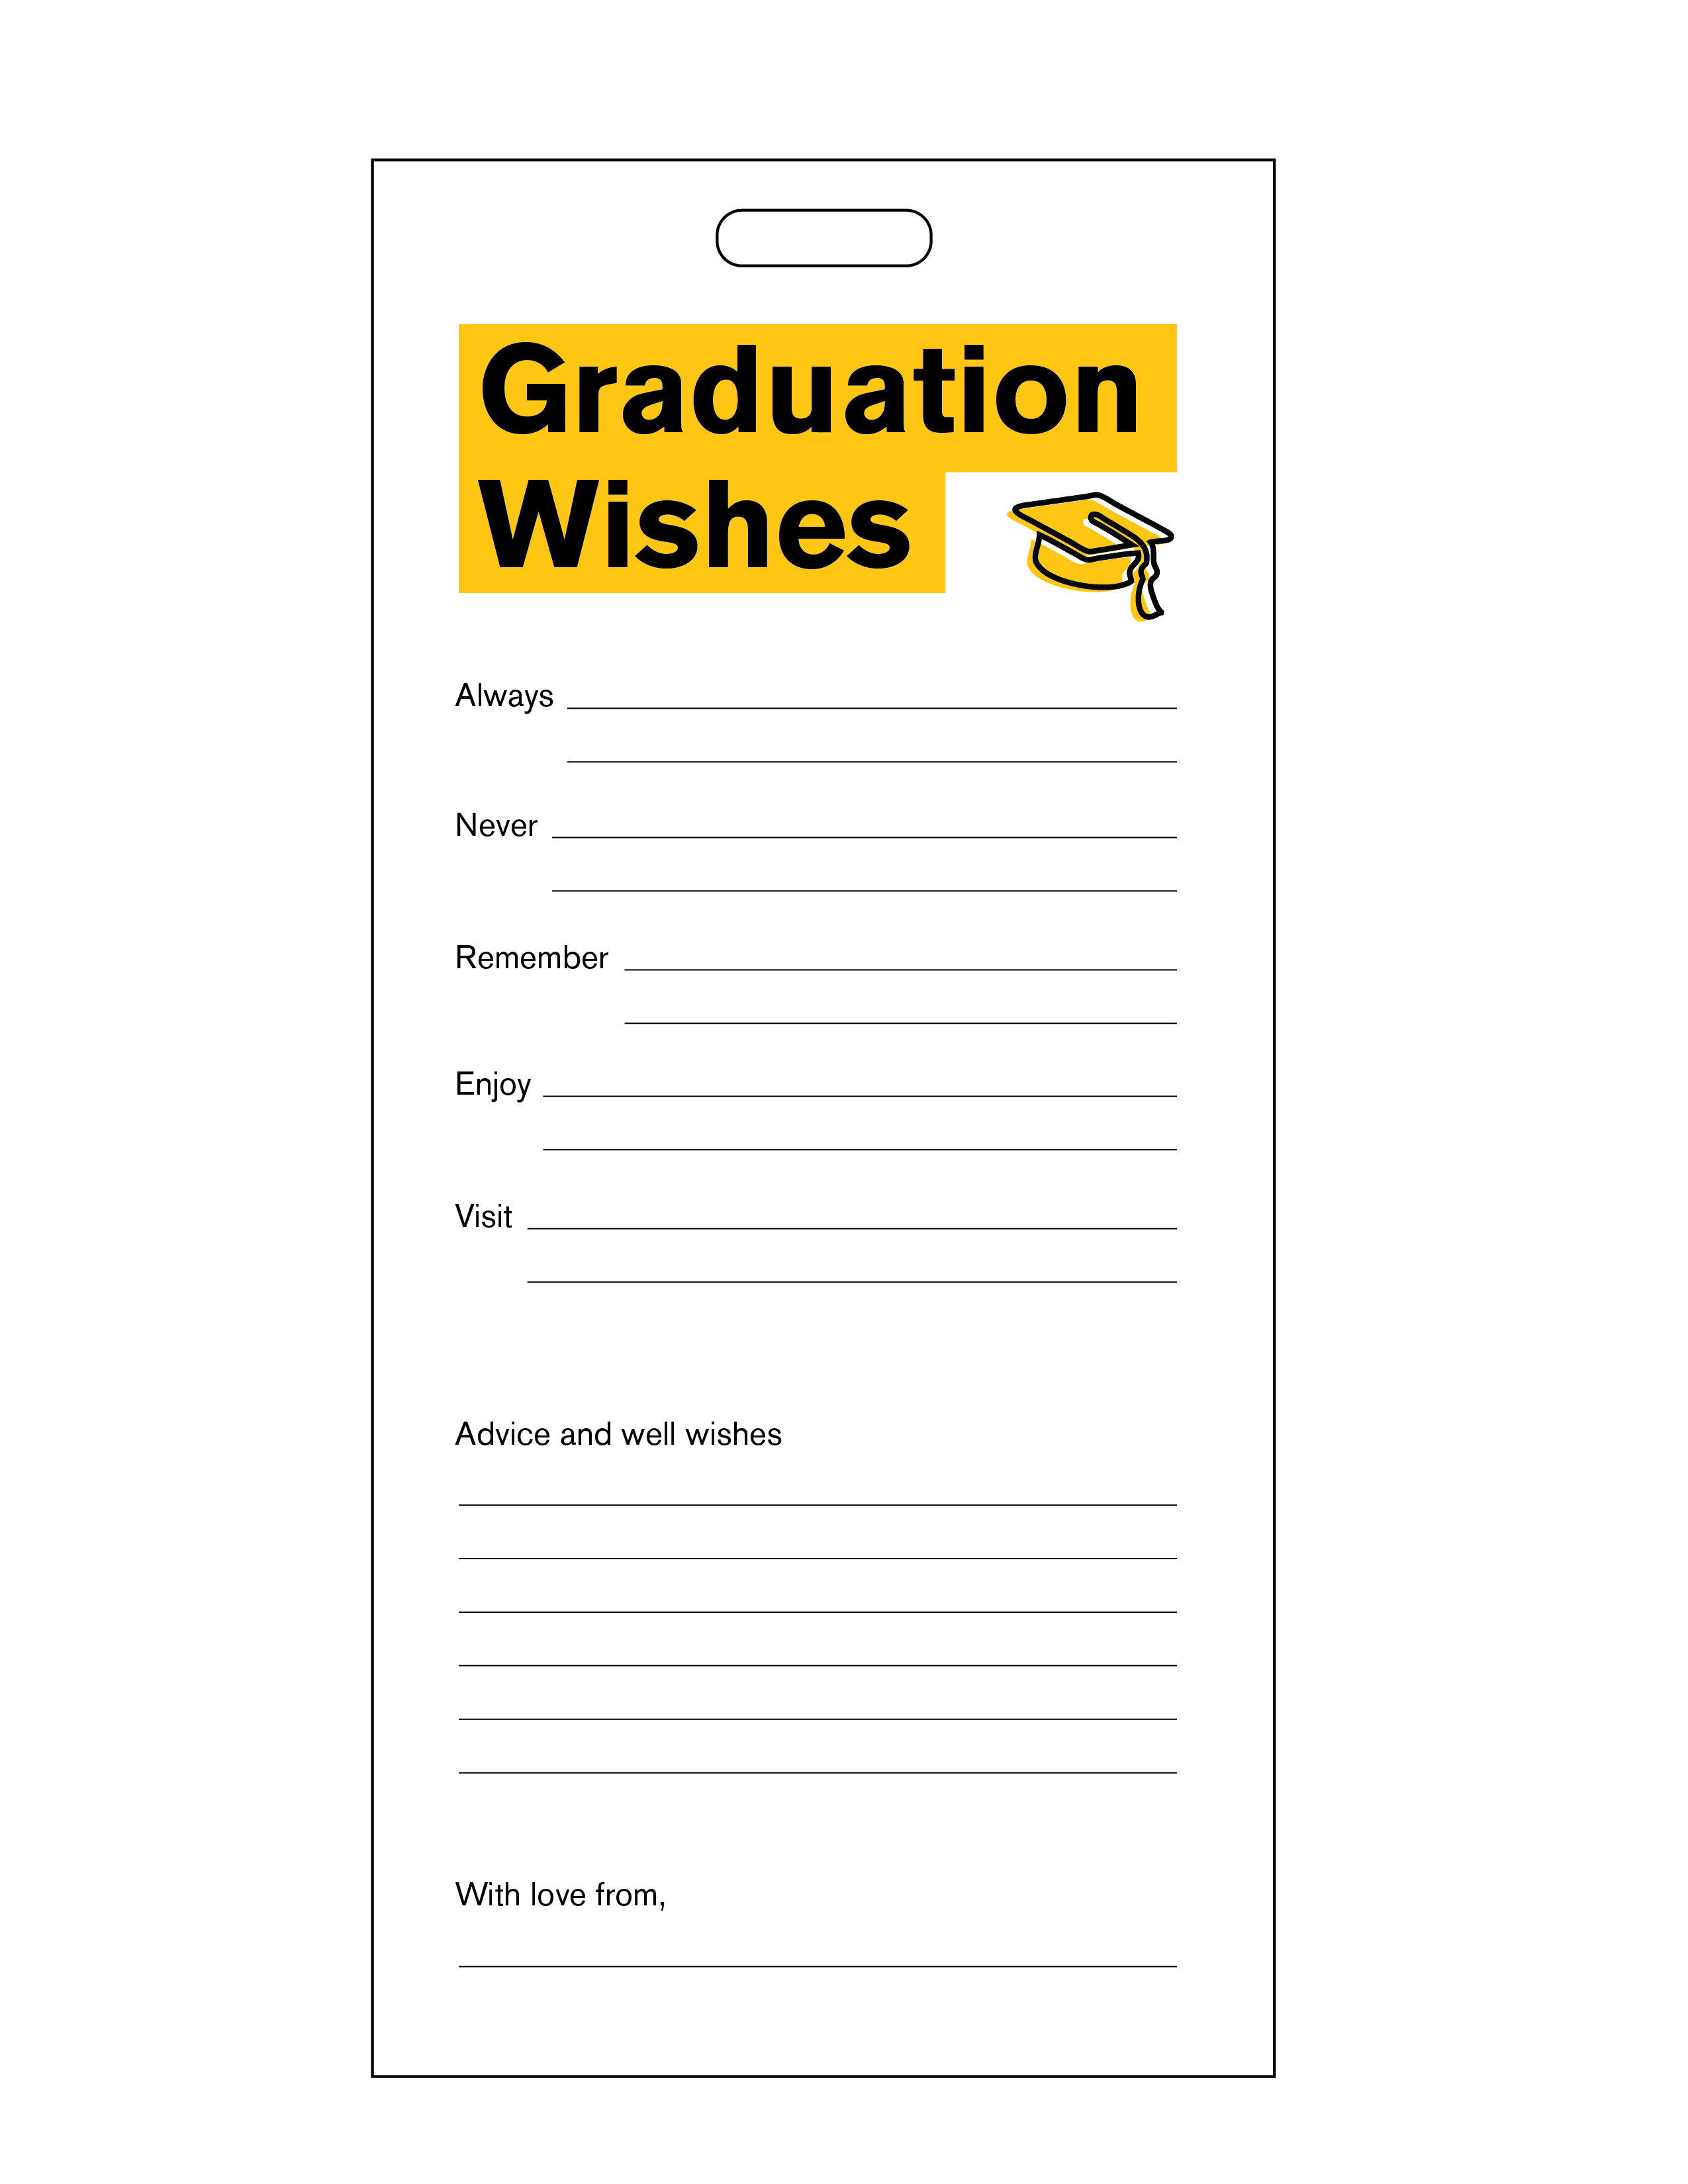 Graduation wishes card with gold background